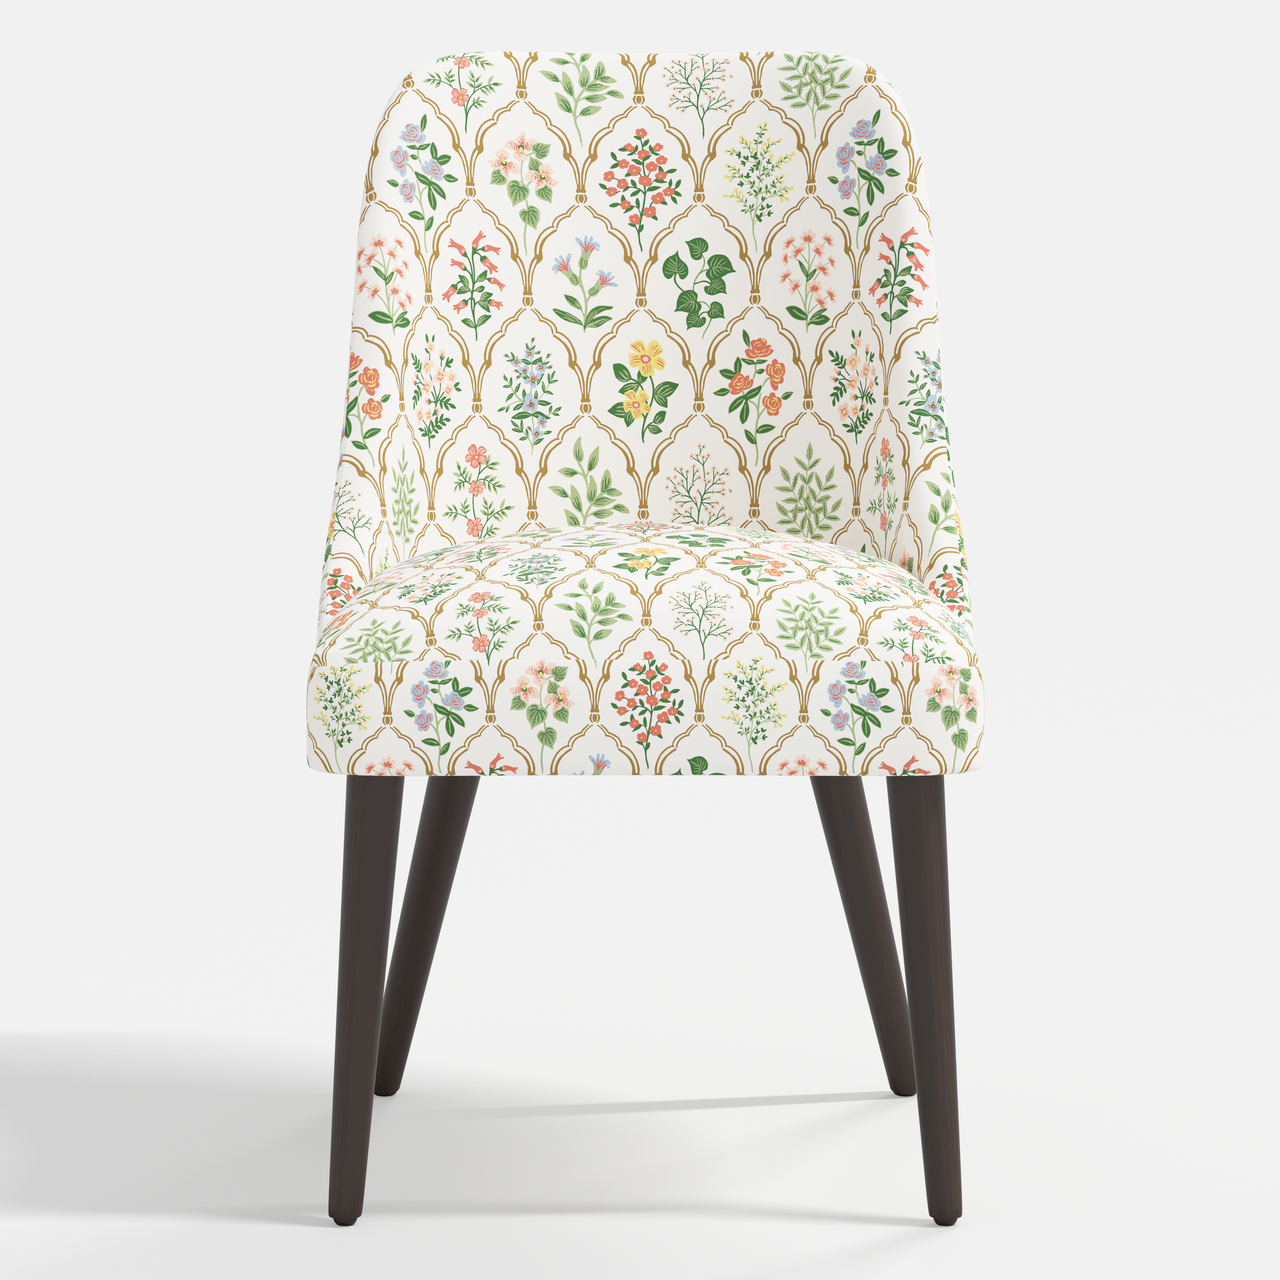 Clare Dining Chair